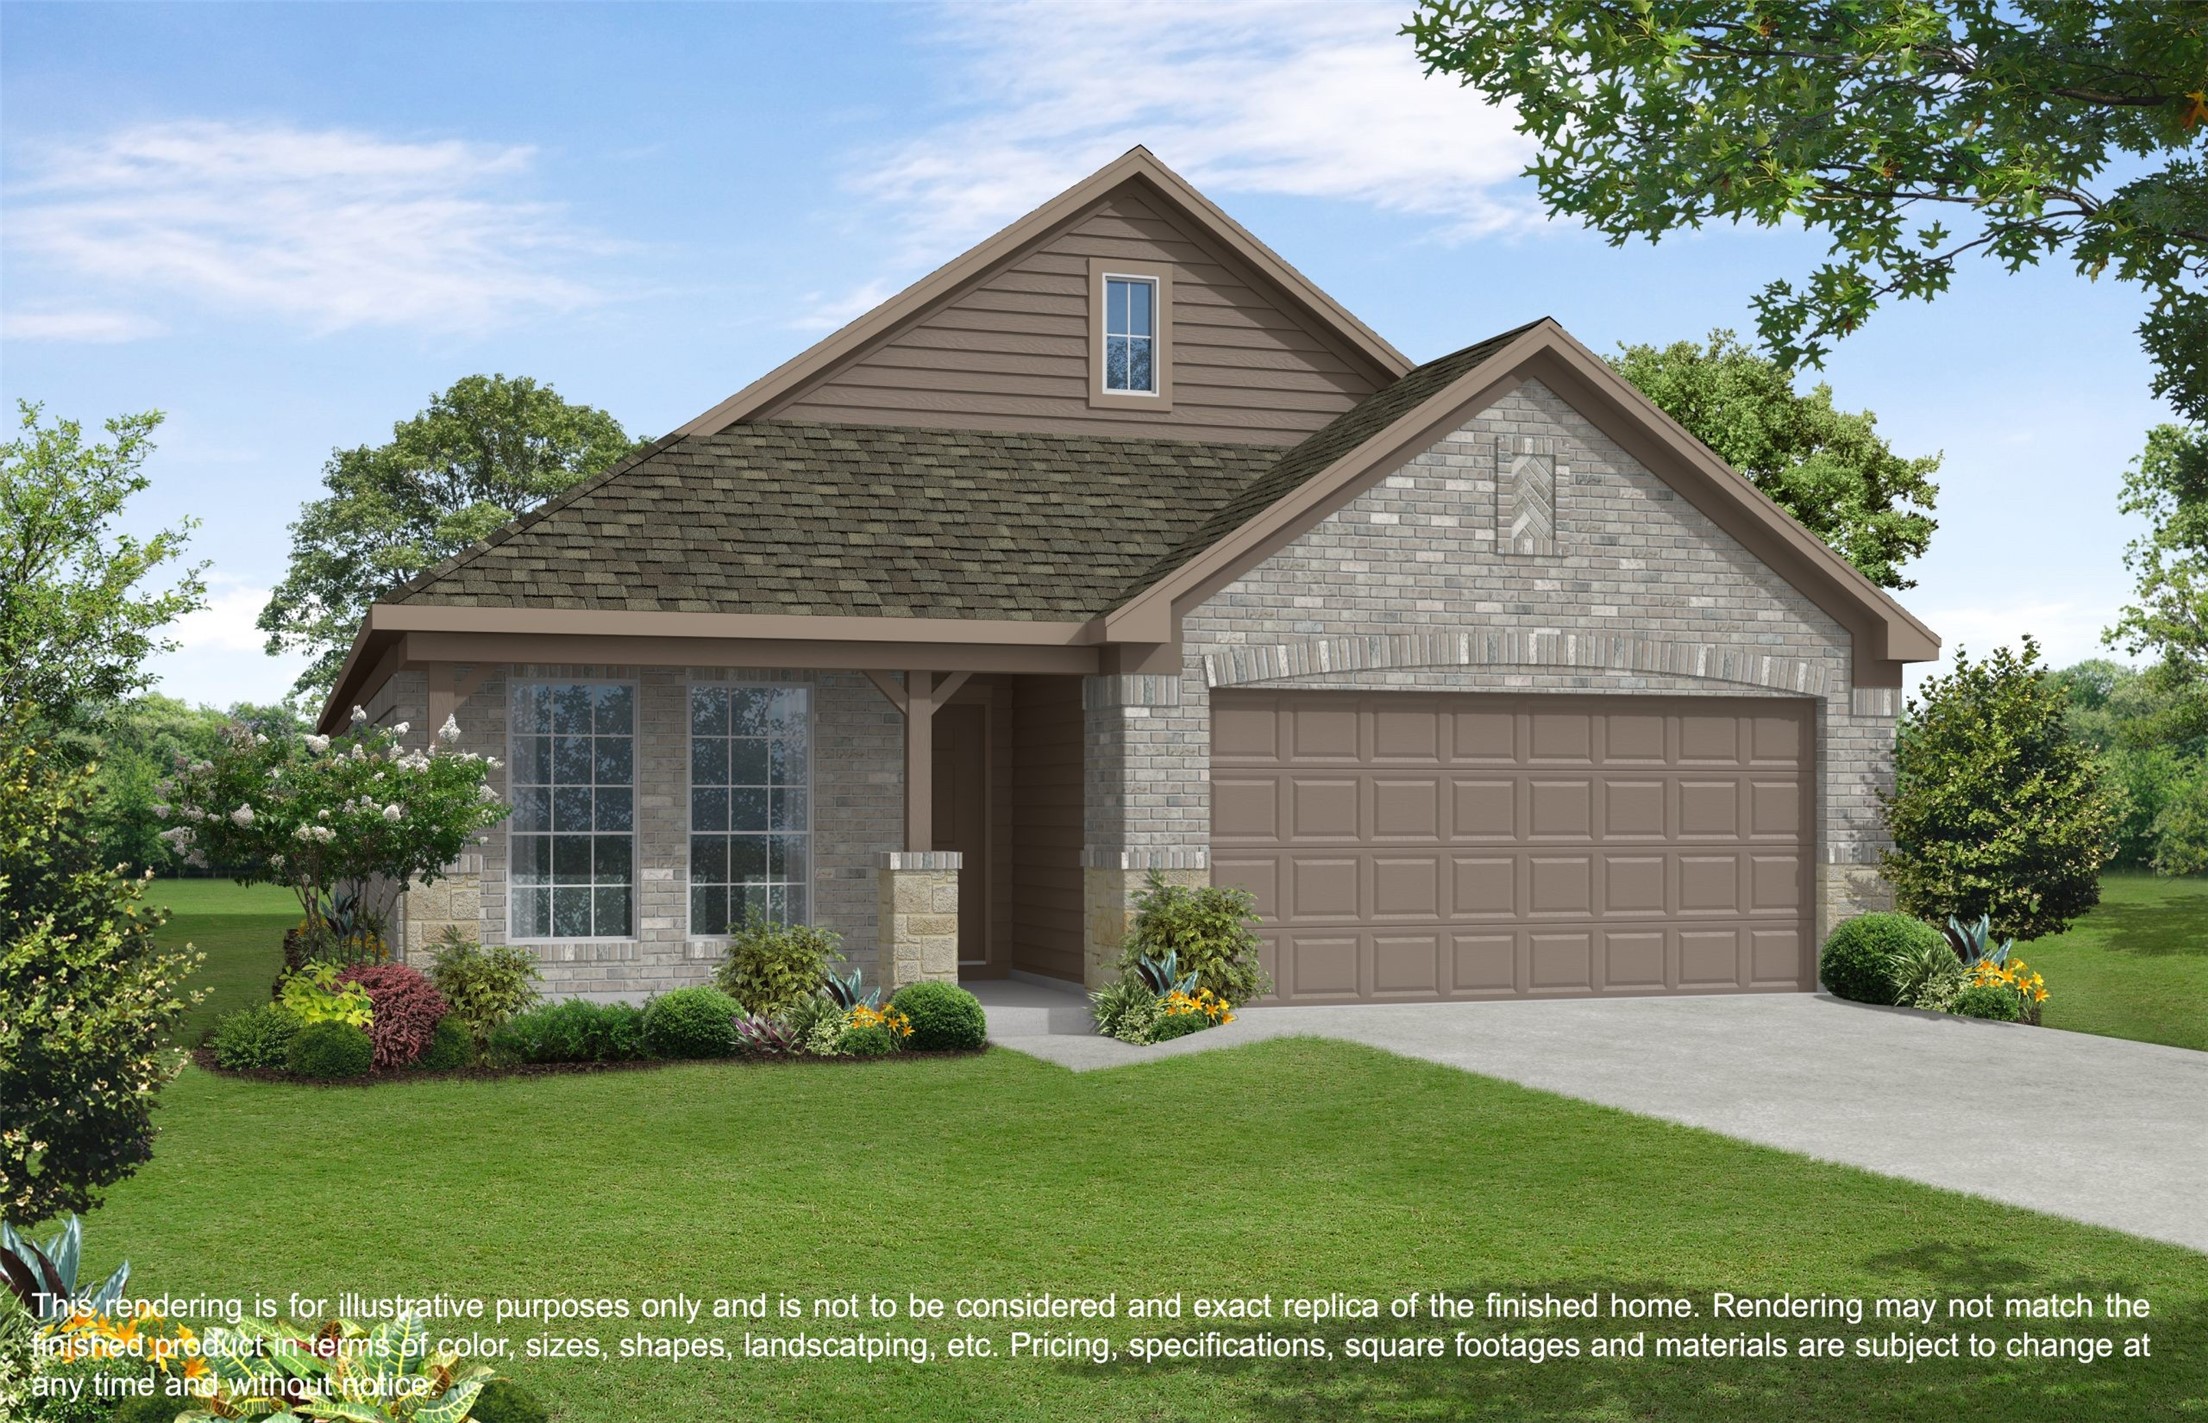 Welcome home to   8122 Wahi Lane located in Marvida and zoned to Cypress-Fairbanks ISD.